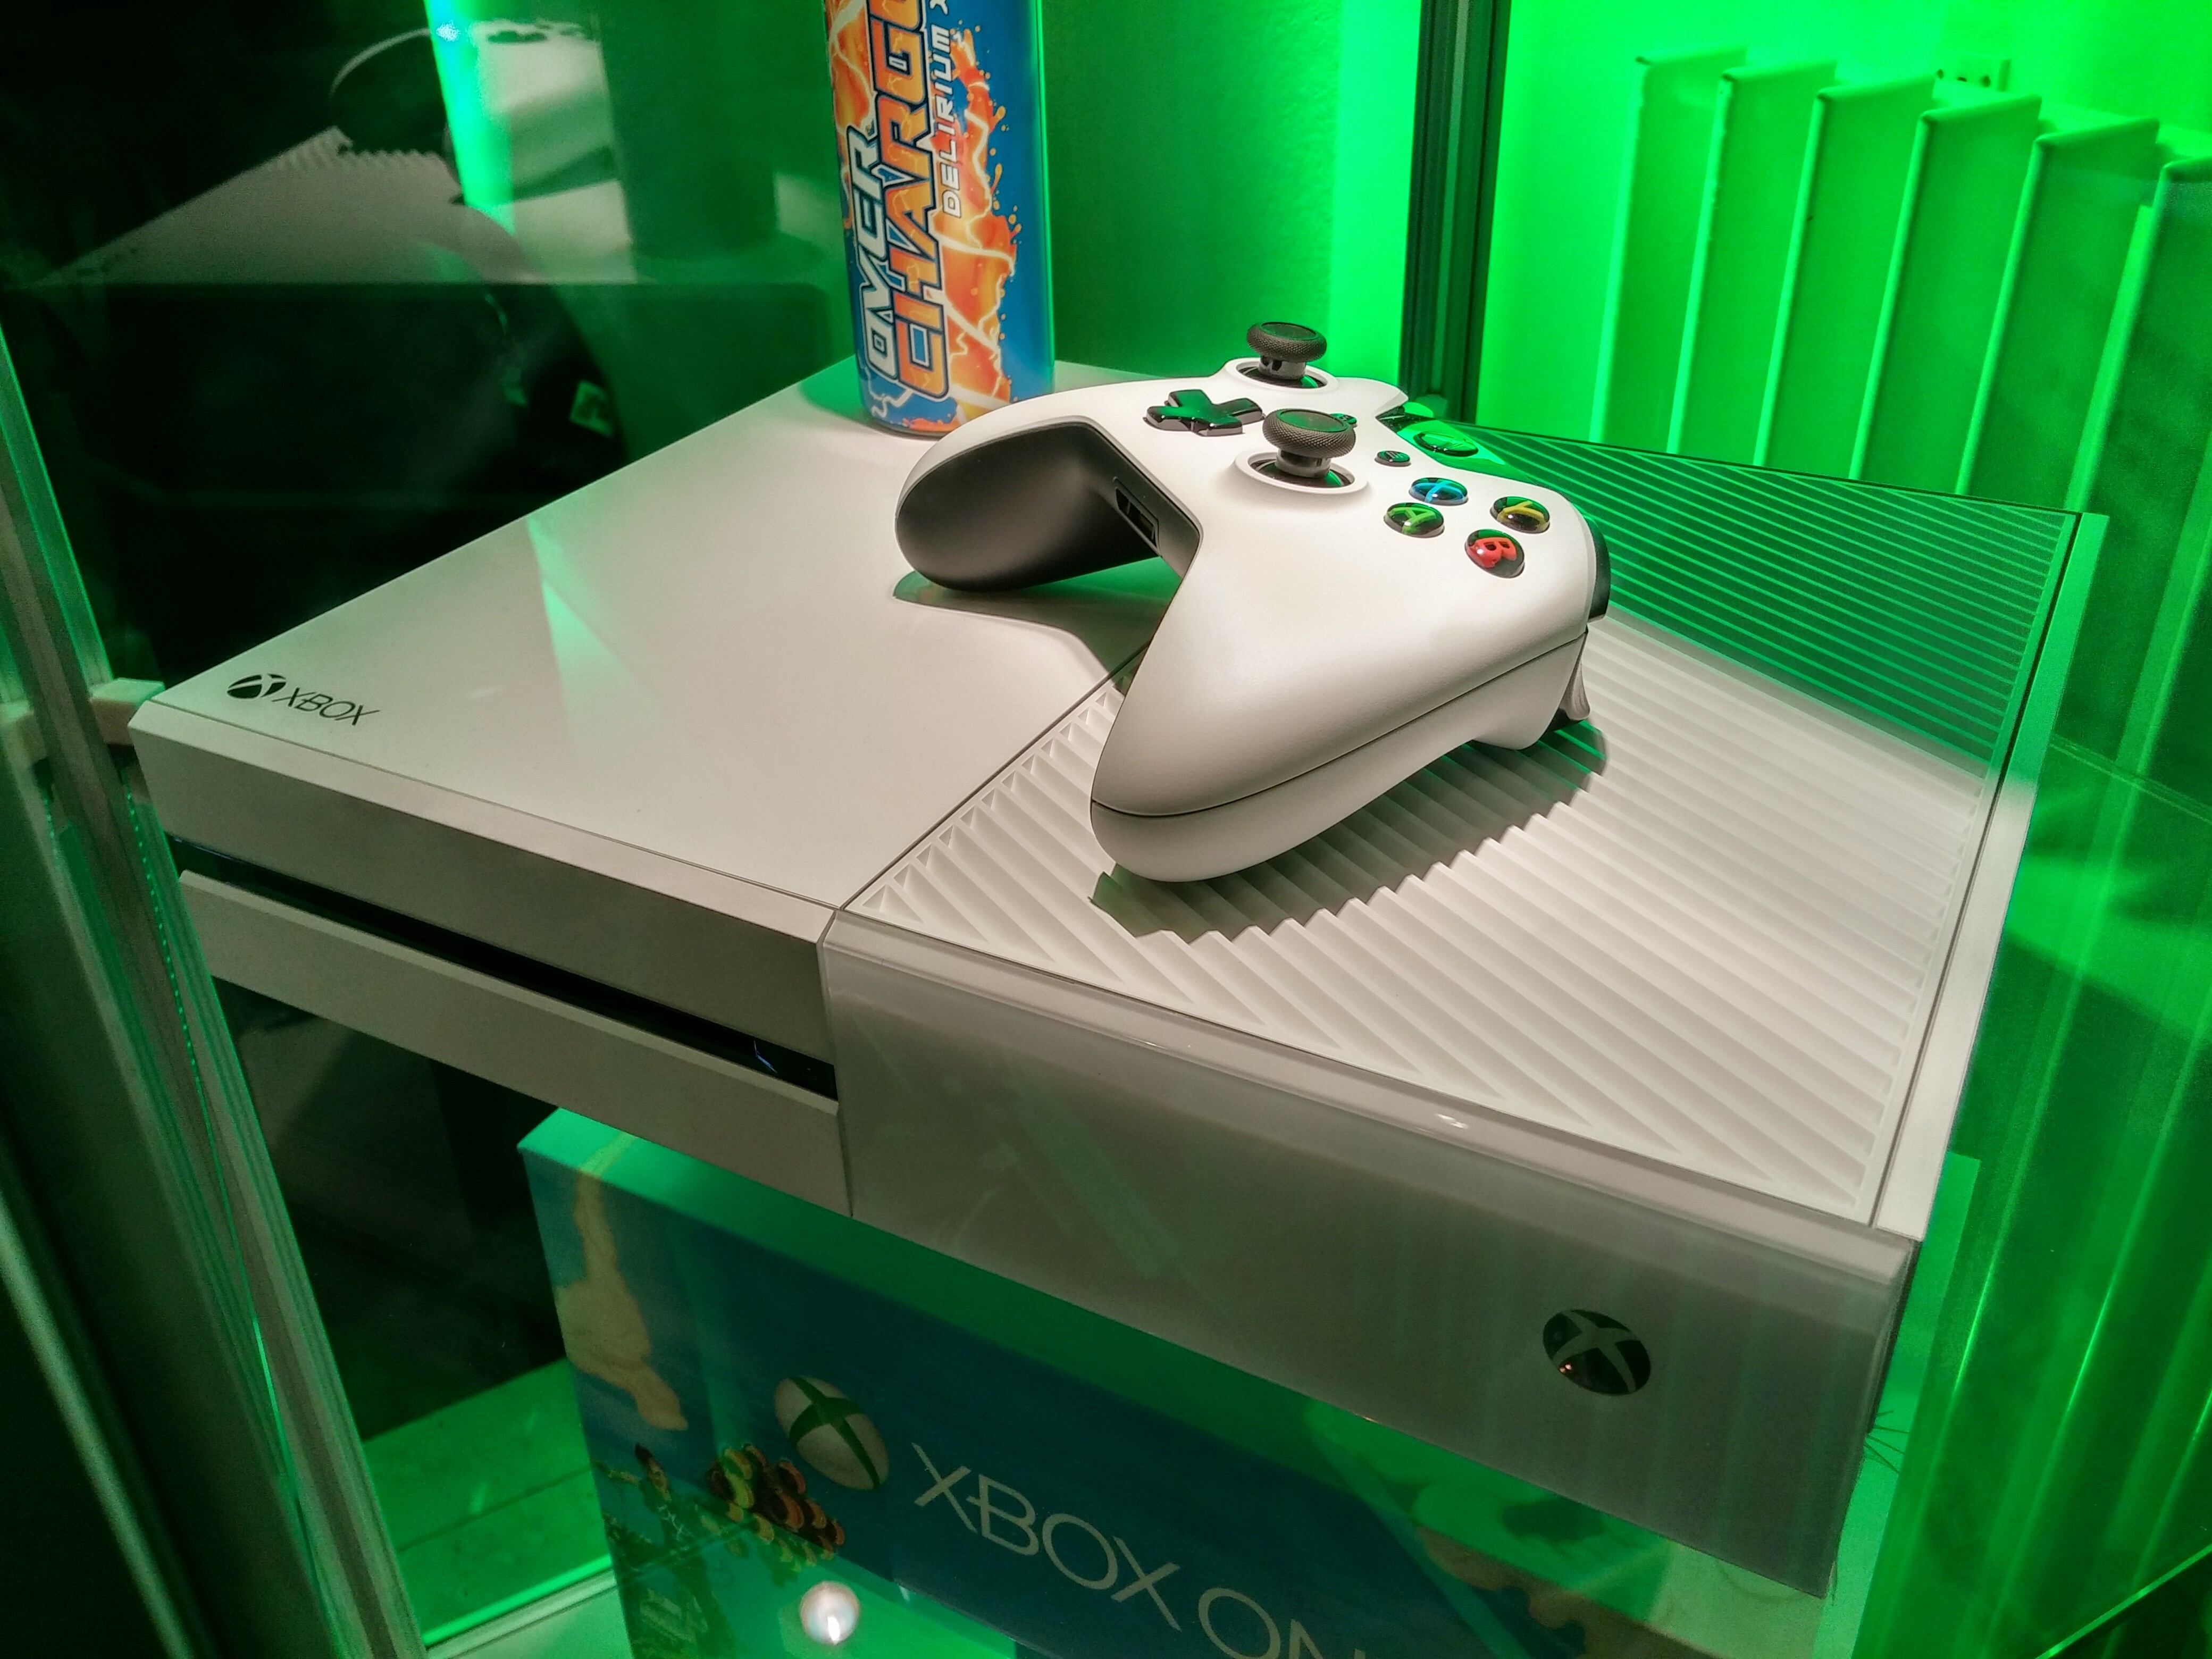 Flashy Gallantry conductor Microsoft unveils new Xbox One models at Gamescom